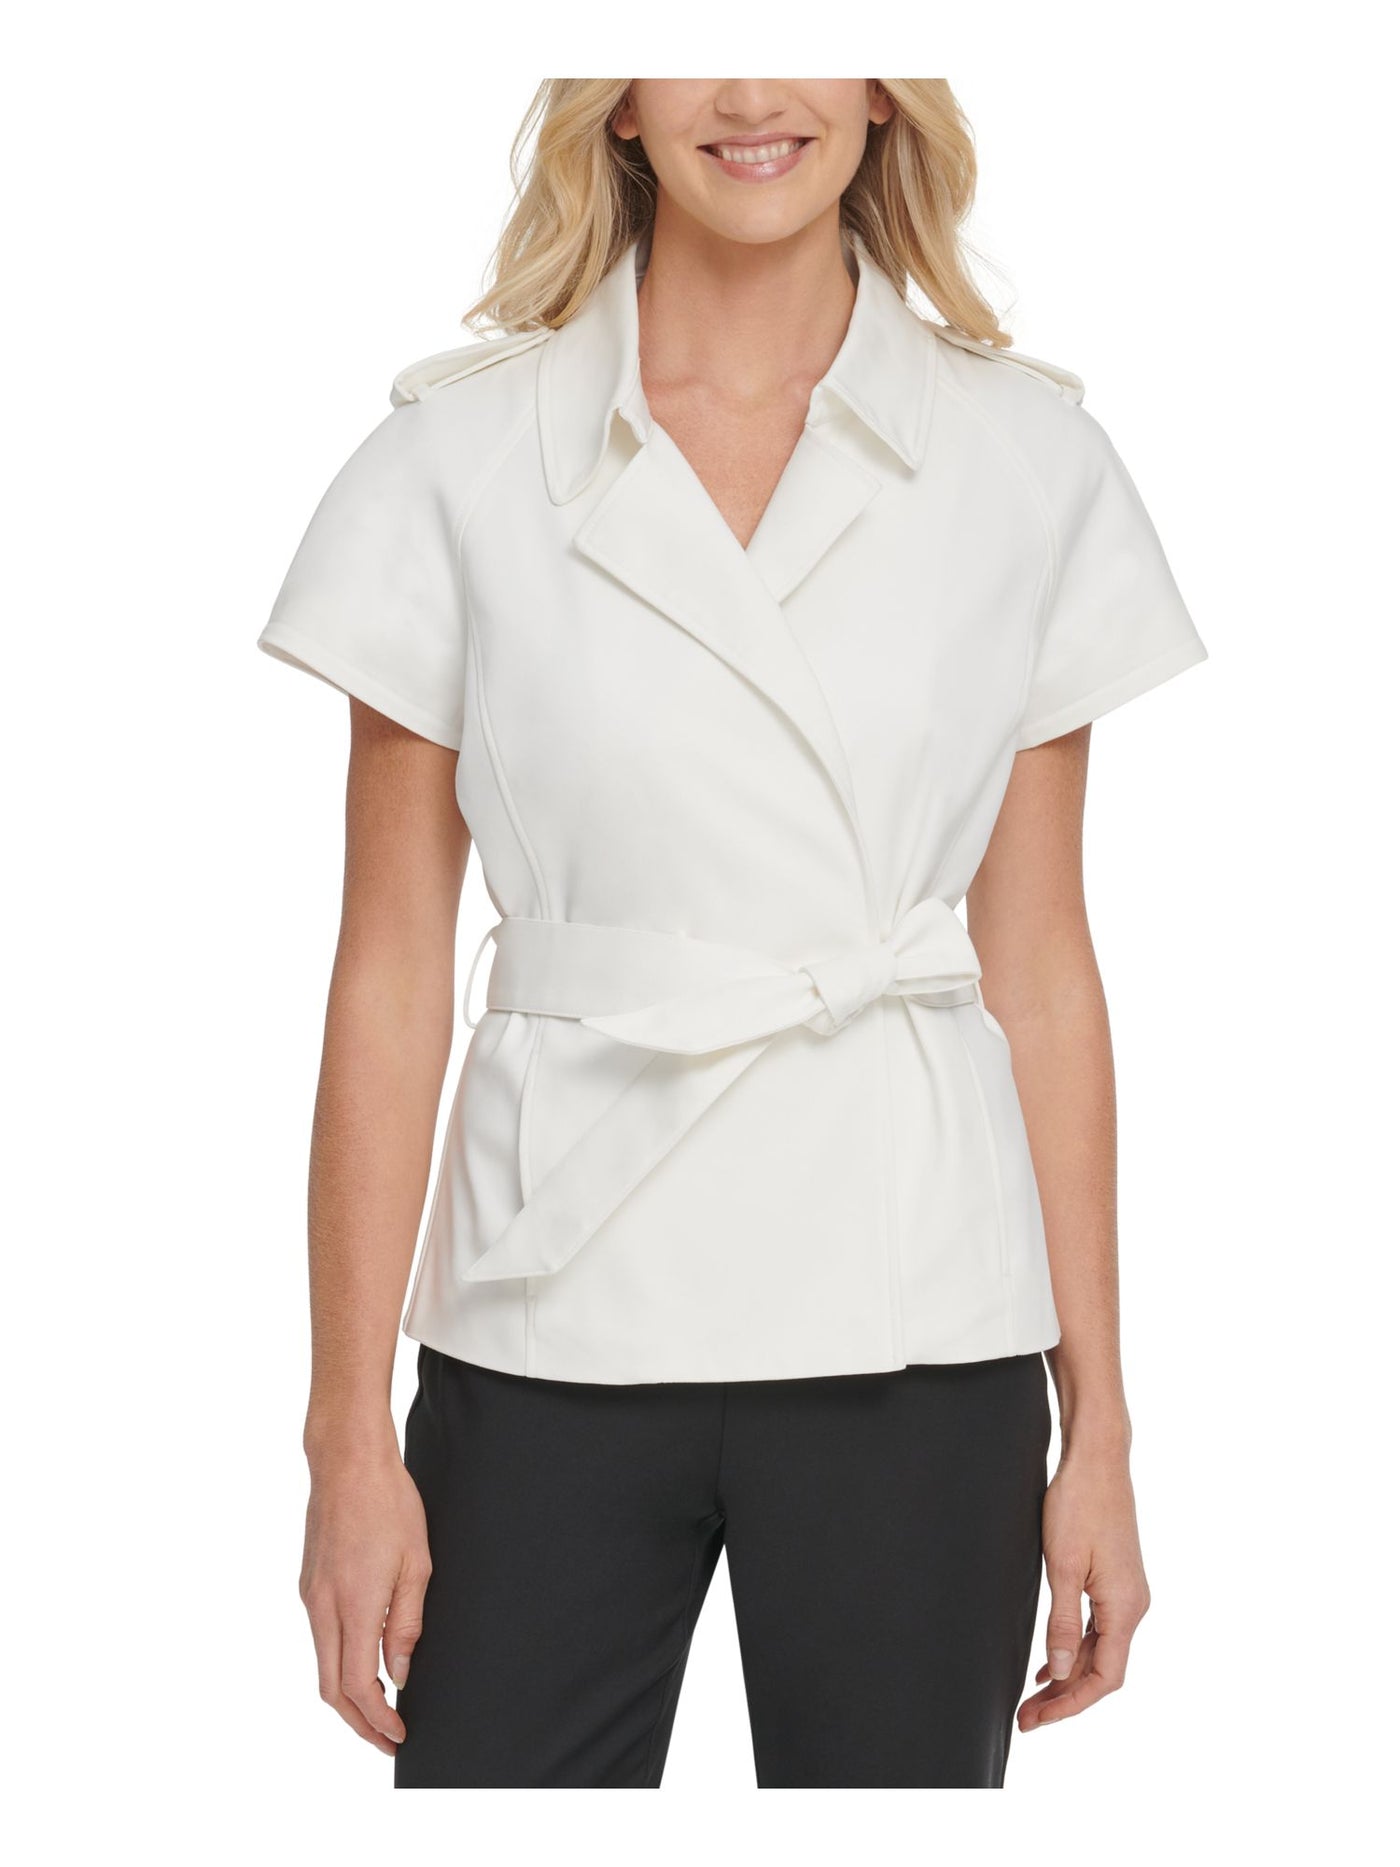 DKNY Womens Ivory Belted Cap Sleeve Collared Wrap Top L